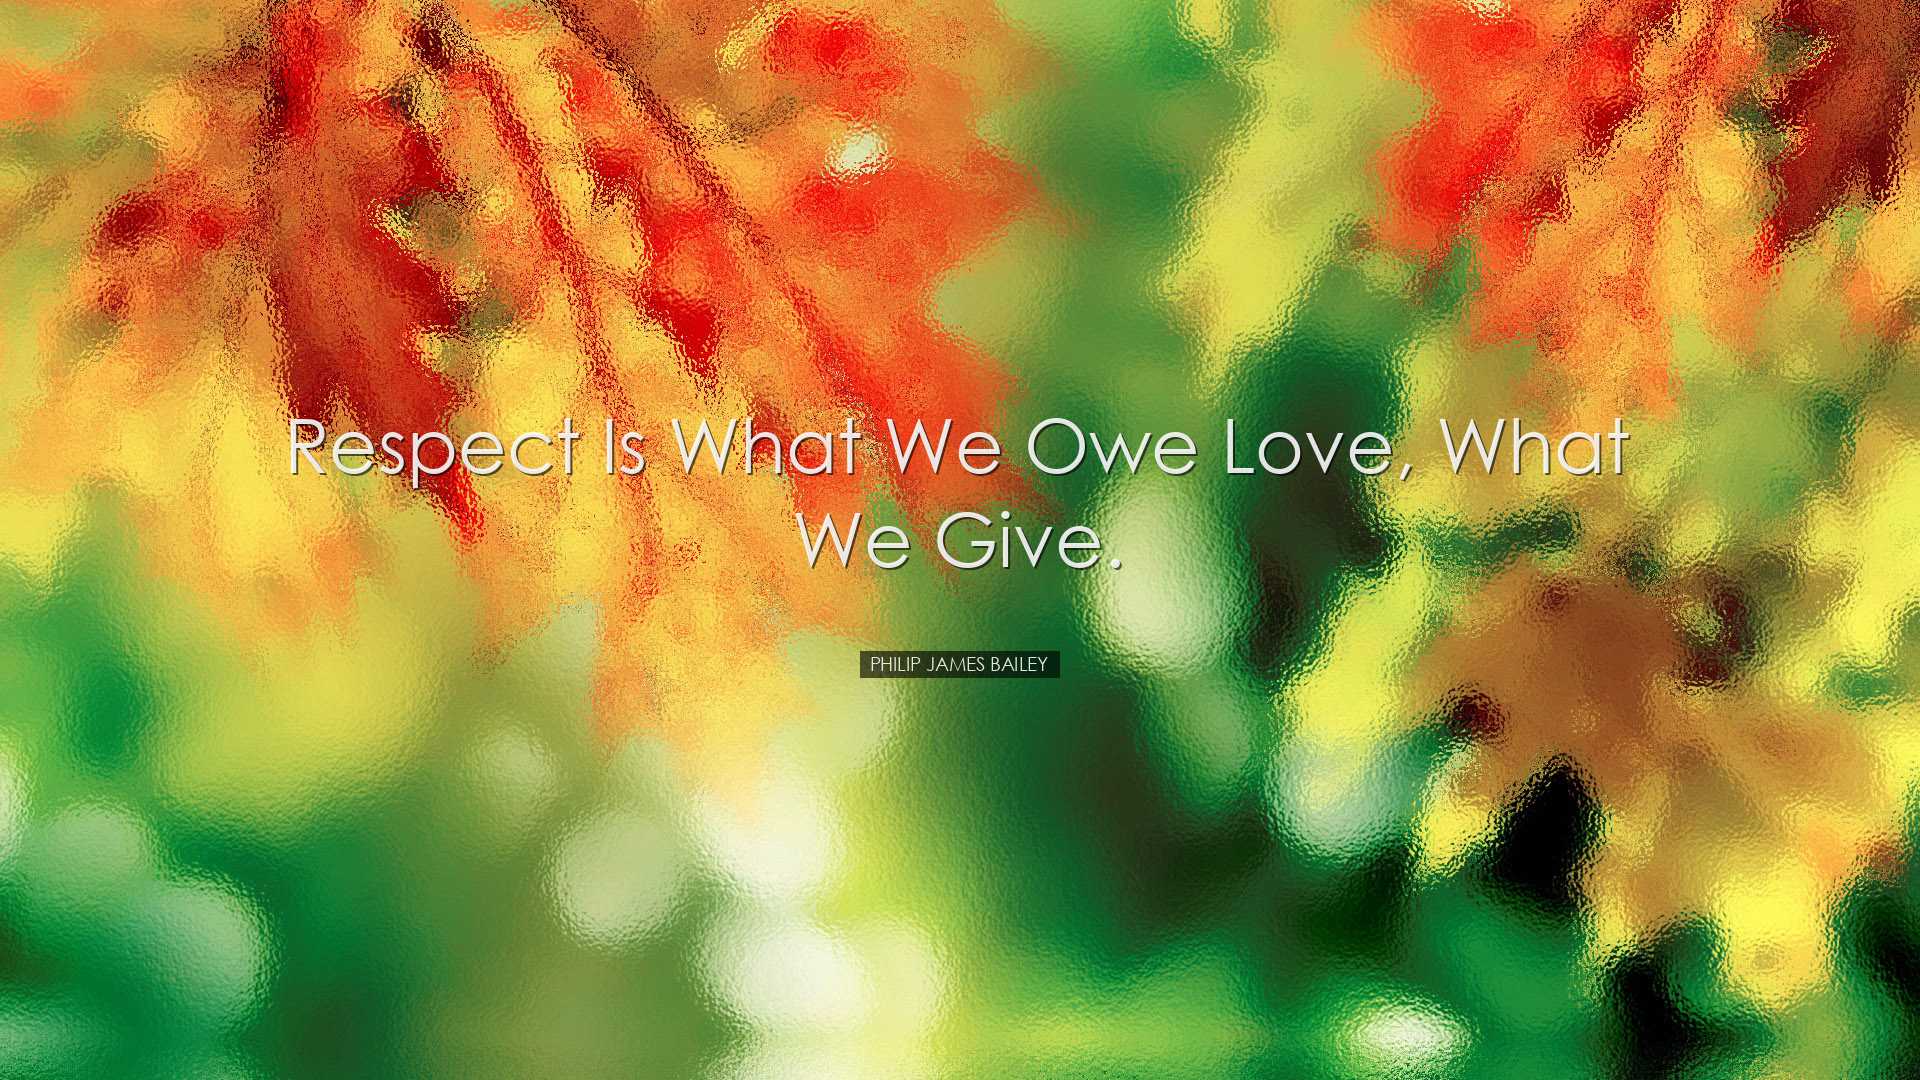 Respect is what we owe love, what we give. - Philip James Bailey